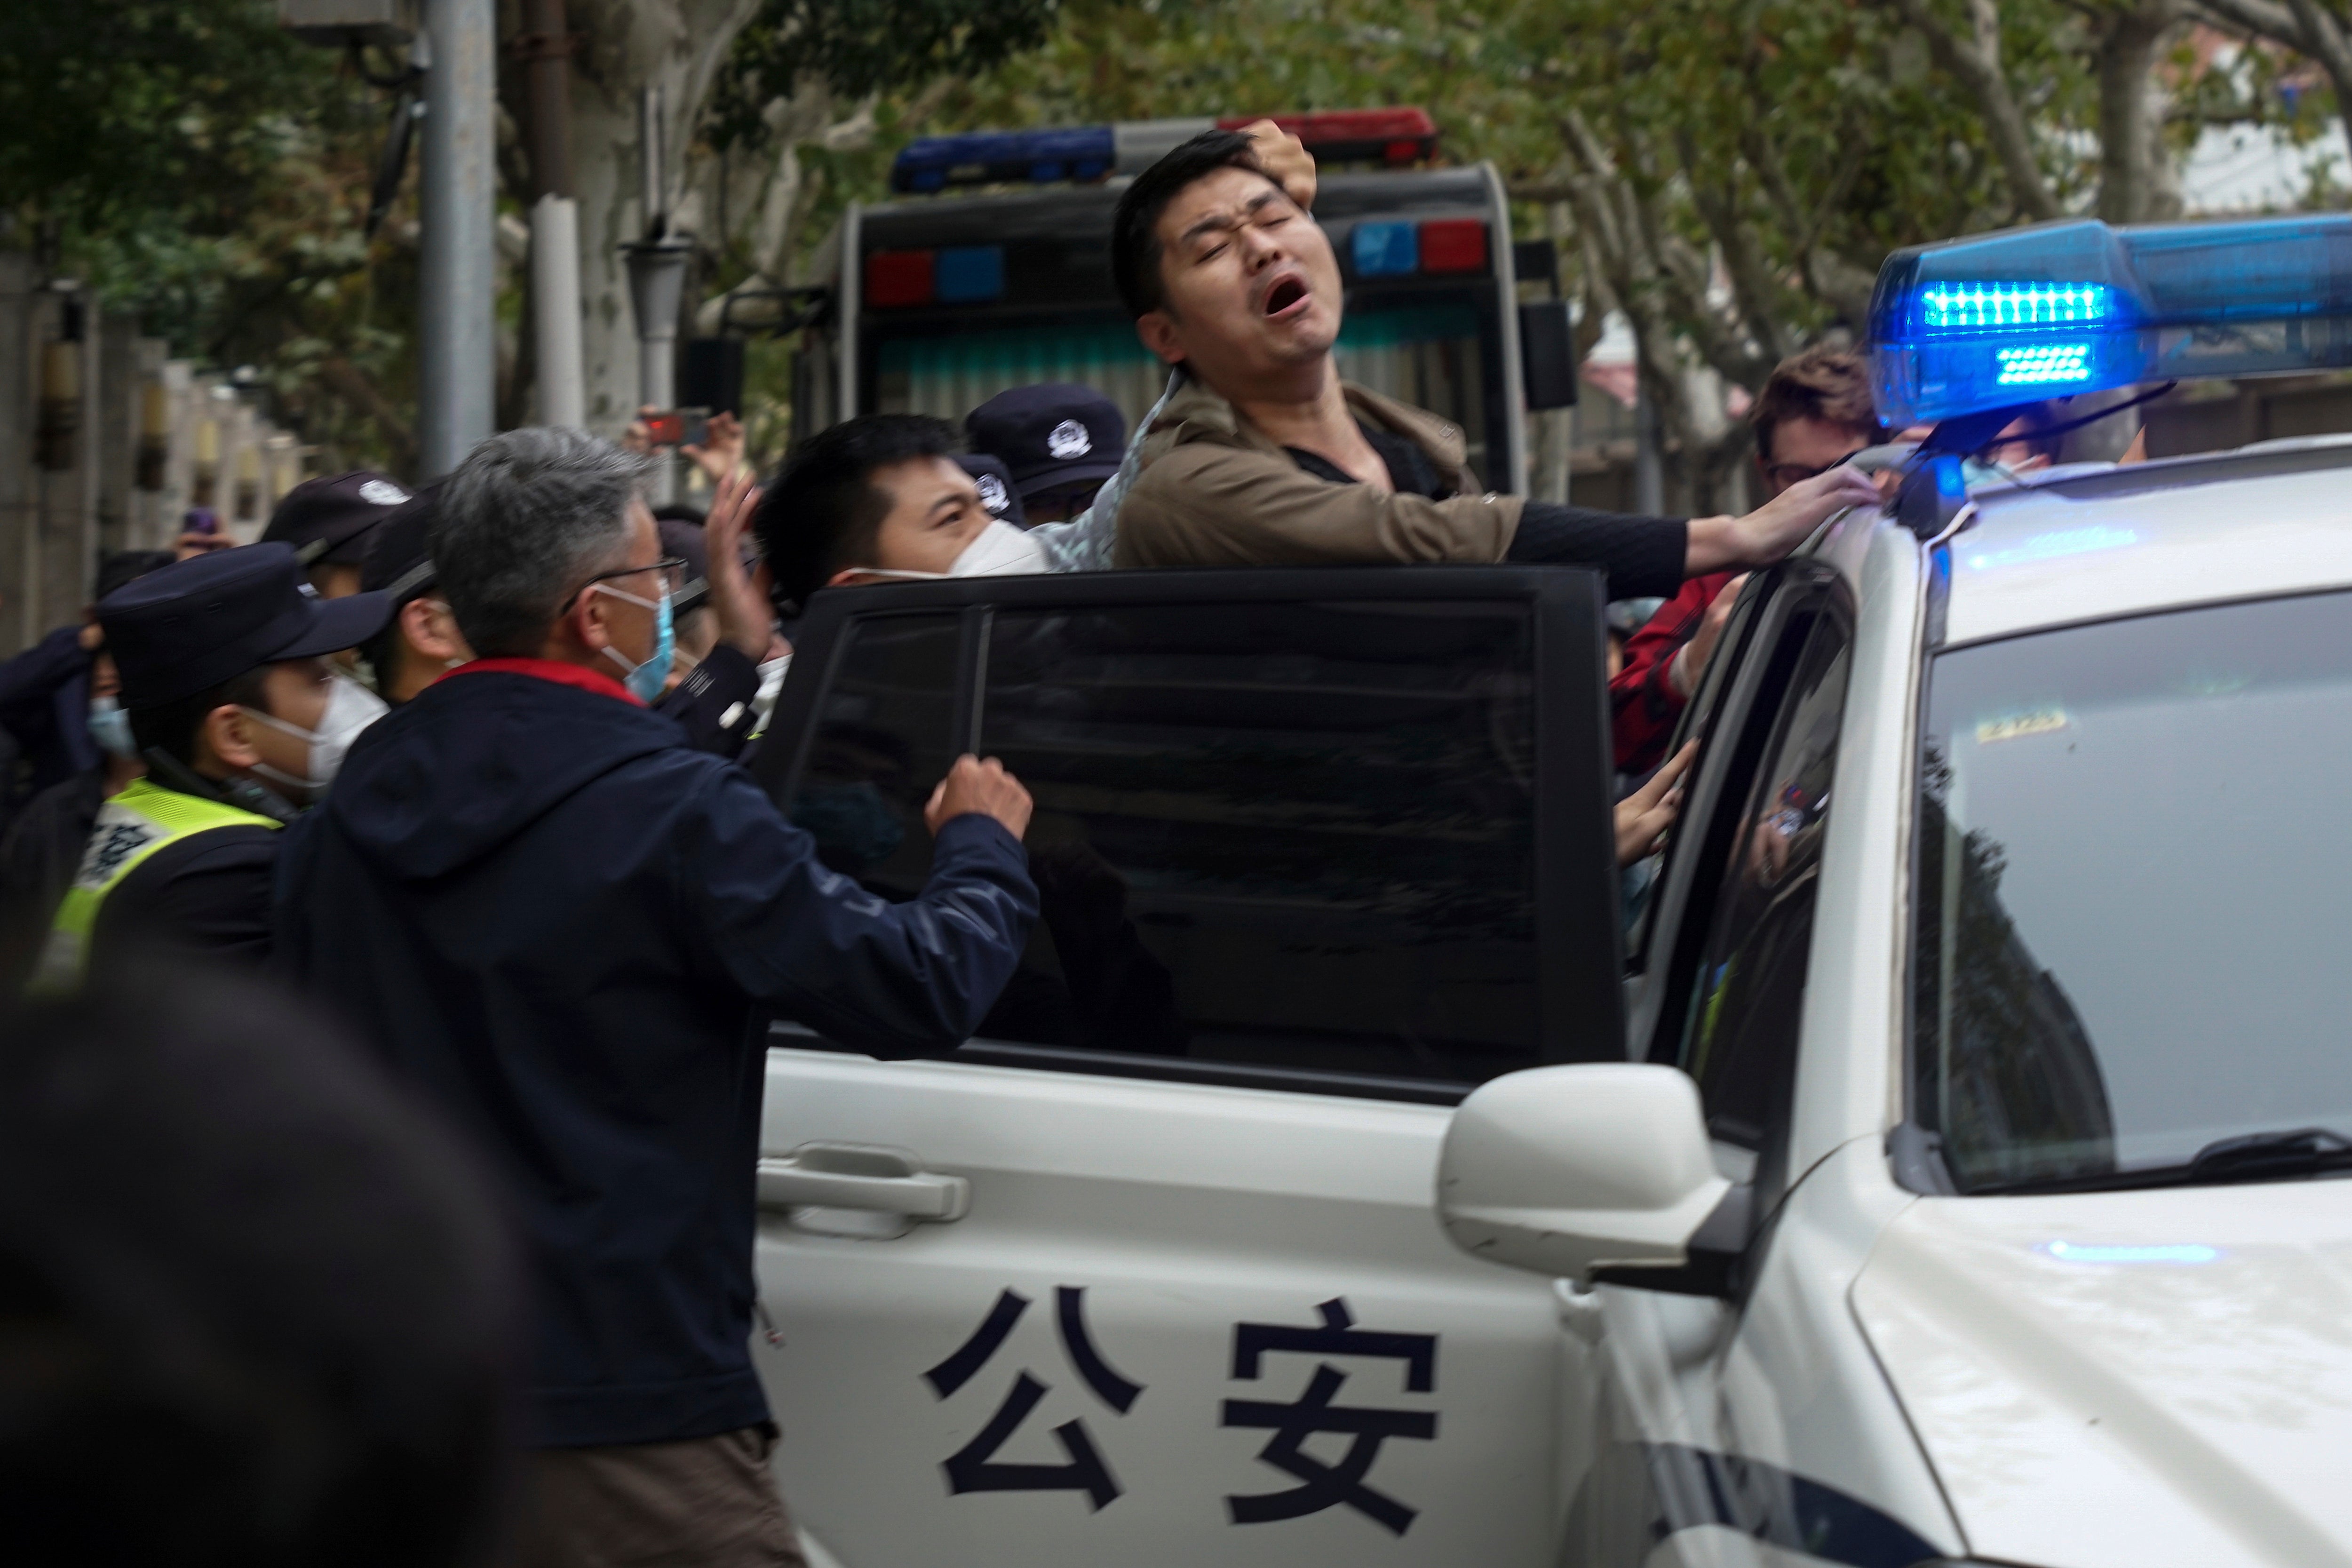 A protester is arrested during a street protest in Shanghai on Sunday